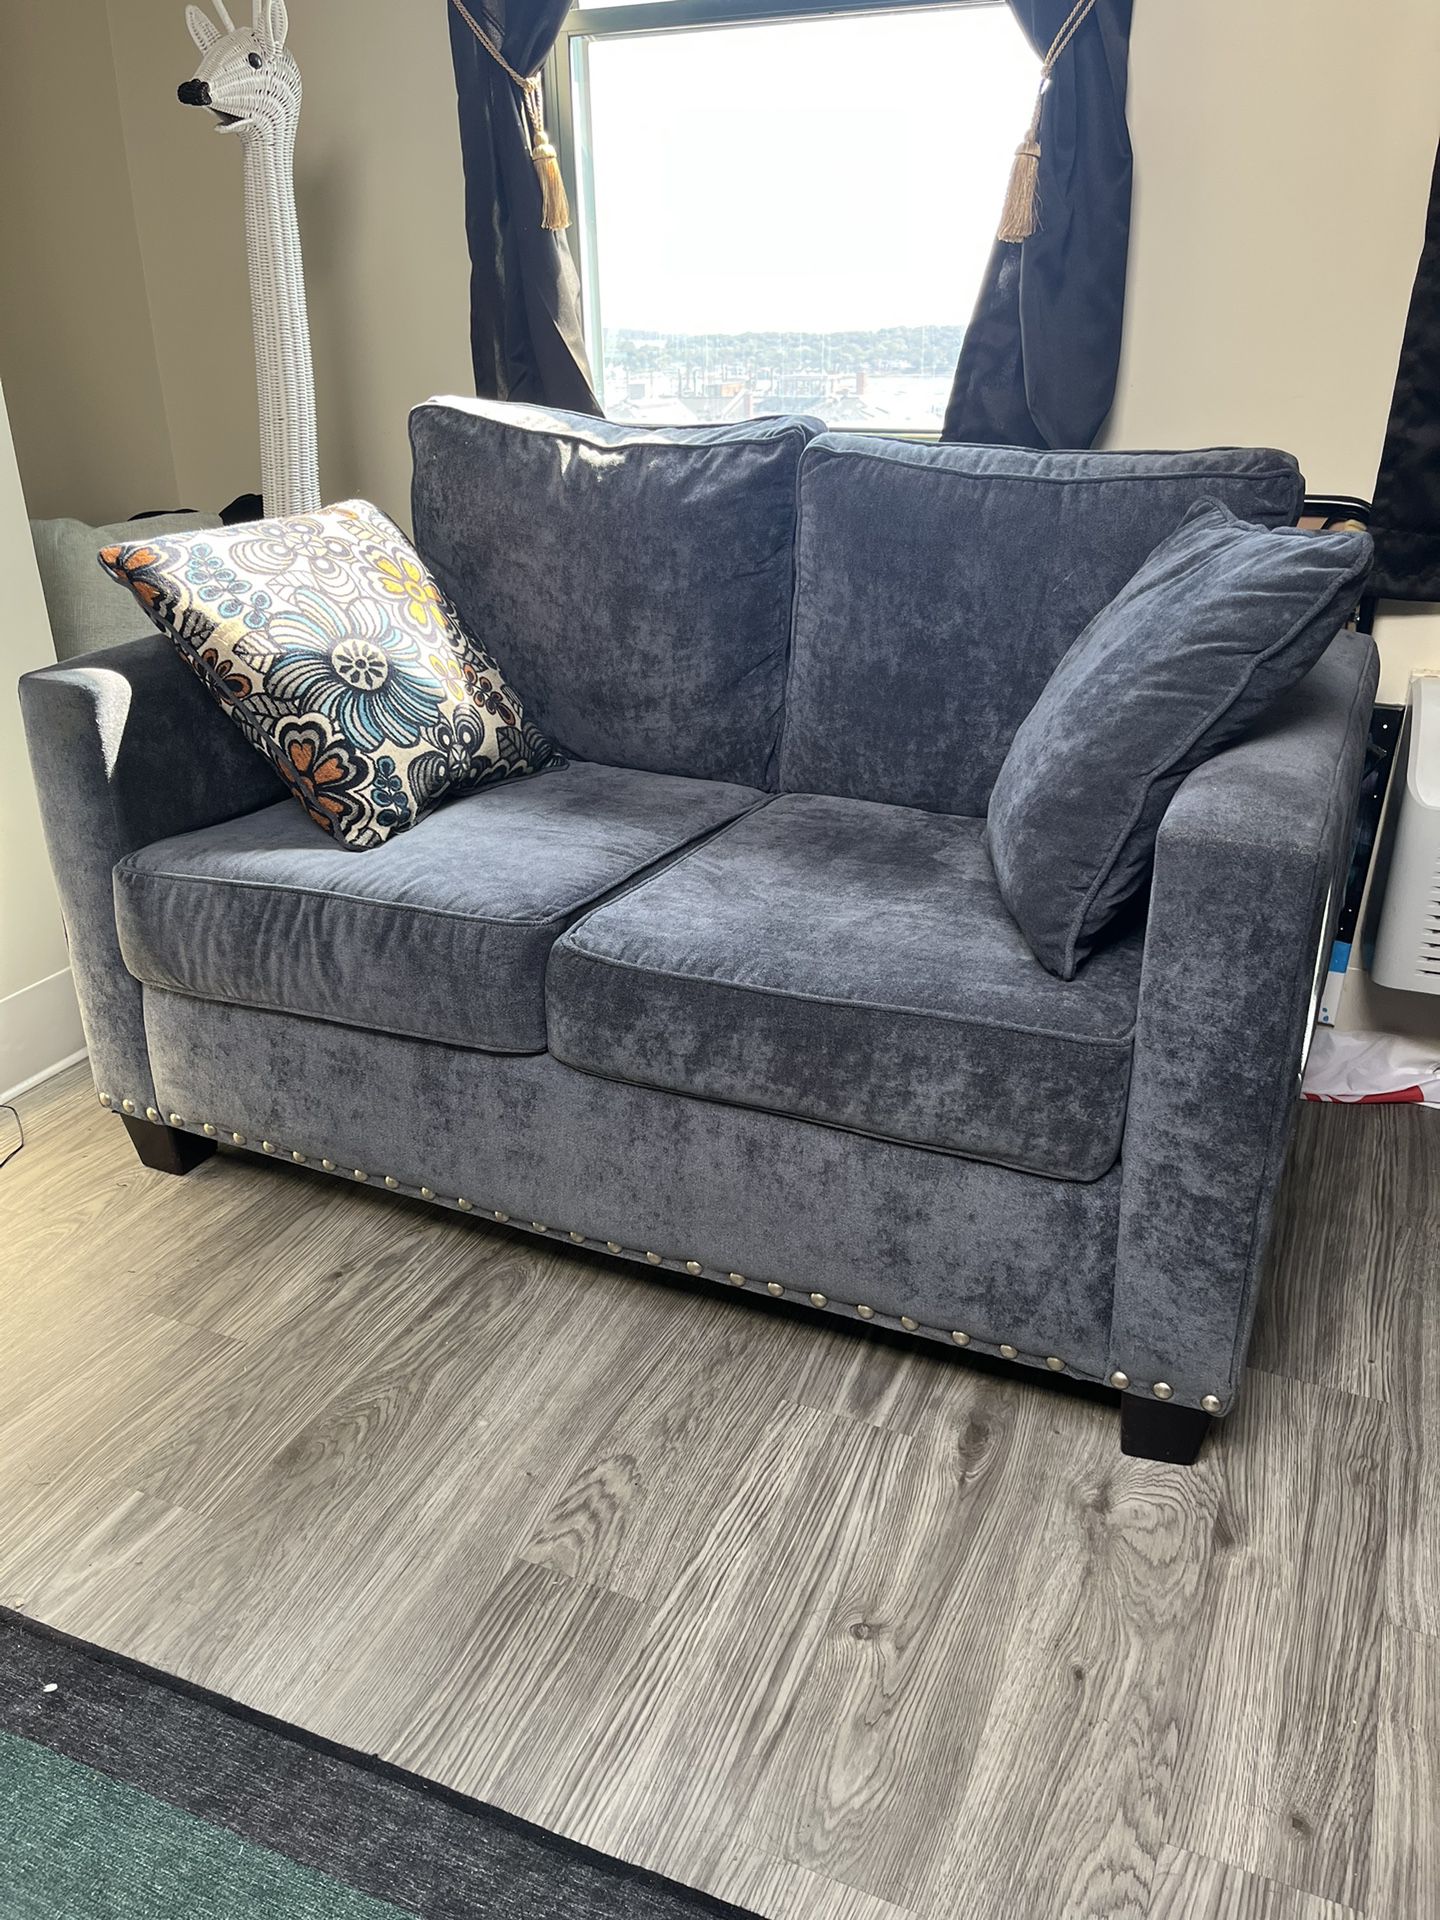 Large Couch & Love Seat Together Or Separate 